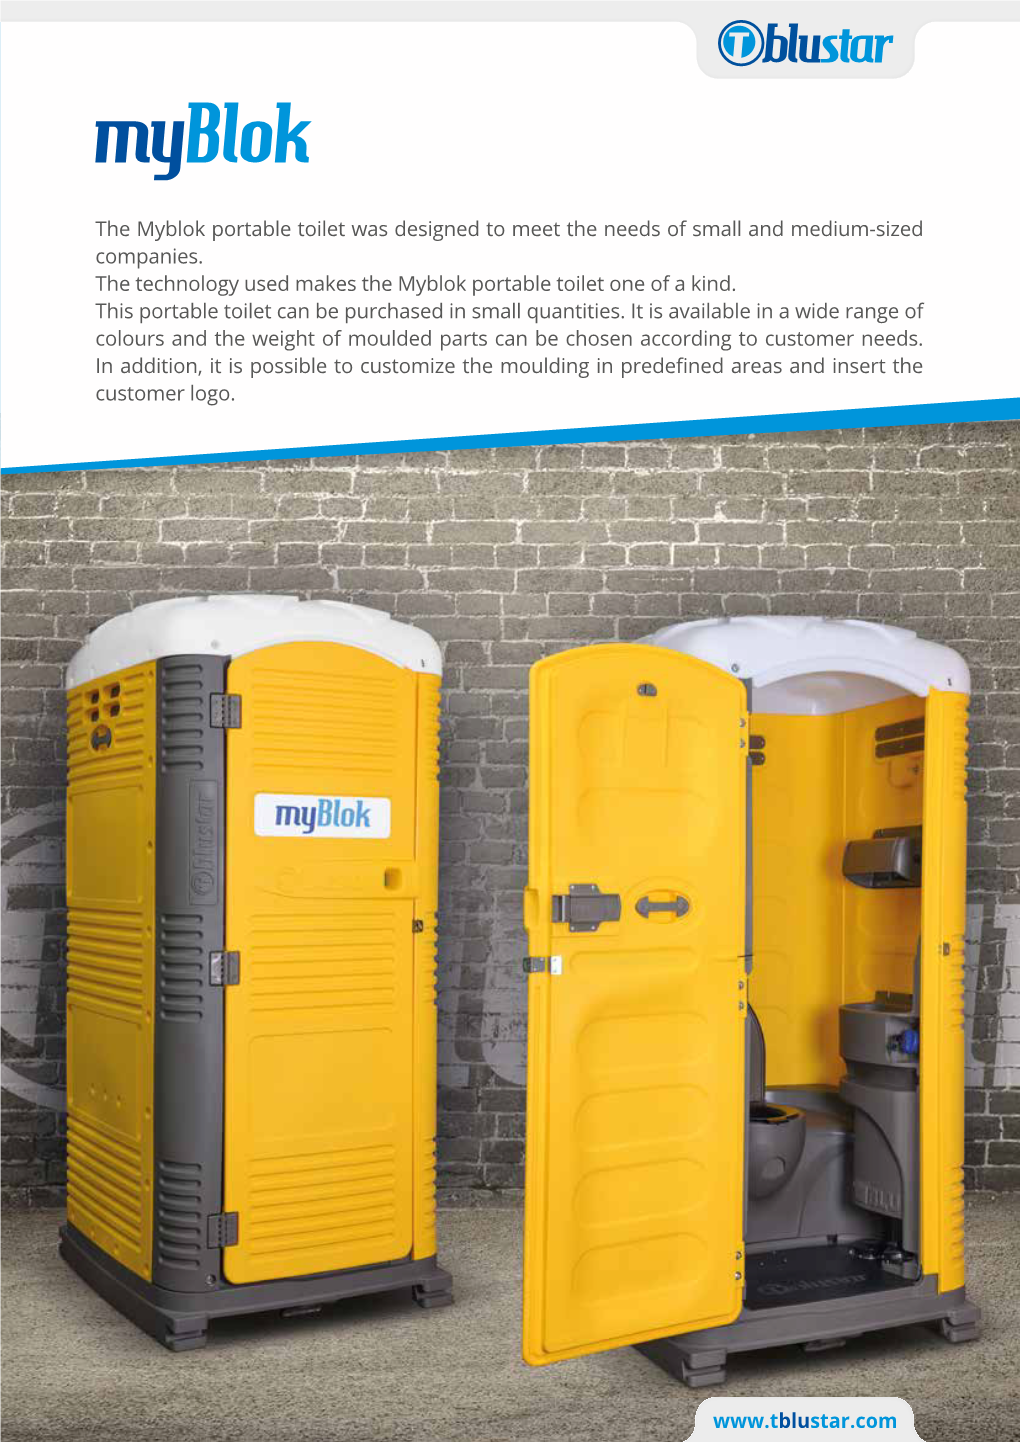 The Myblok Portable Toilet Was Designed To